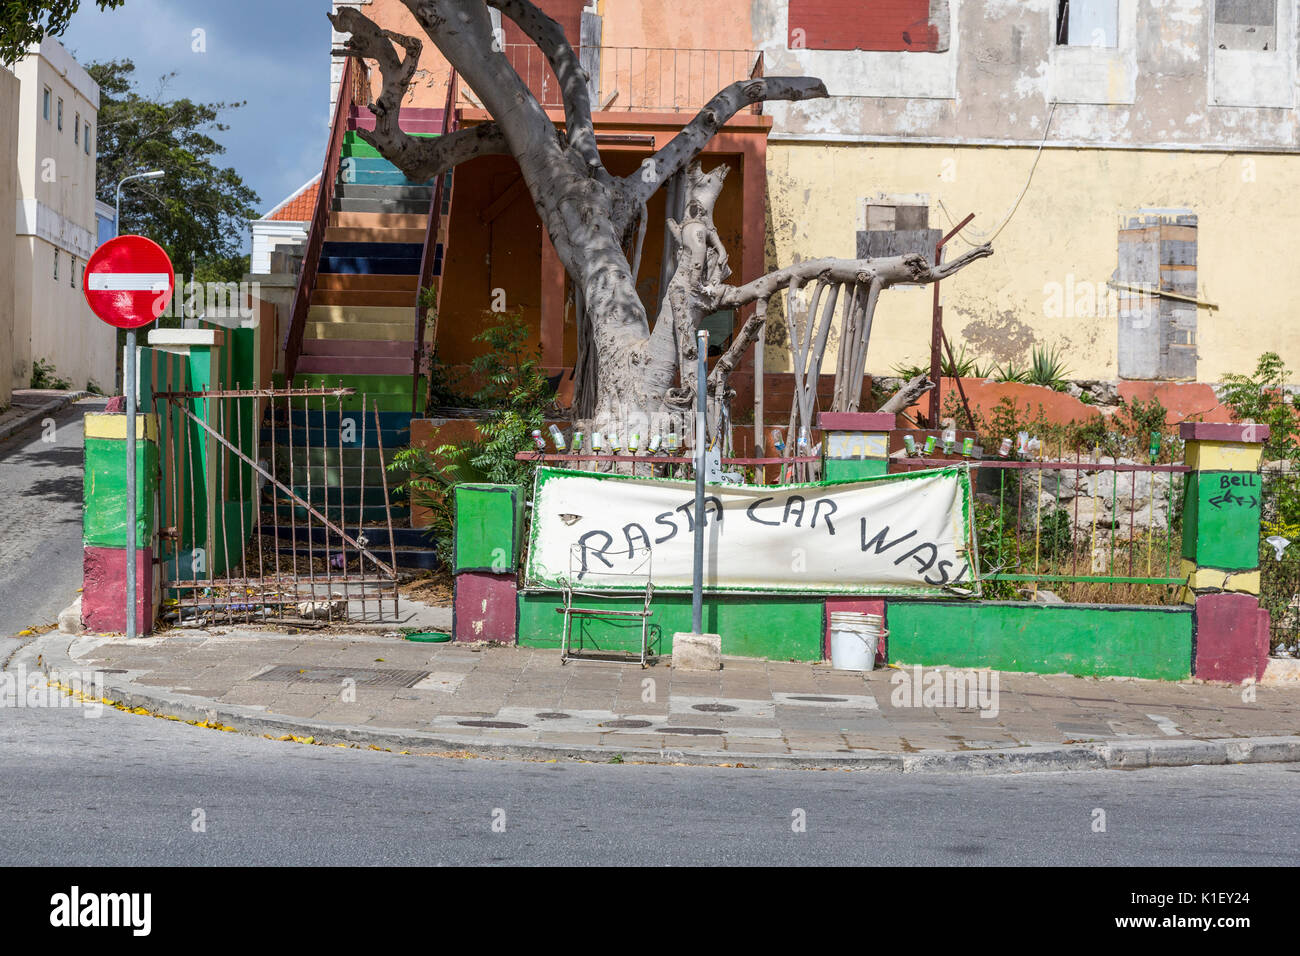 Willemstad, Curacao, Lesser Antilles.  Rastafarian Car Wash Site, Attendant Temporarily Absent. Stock Photo